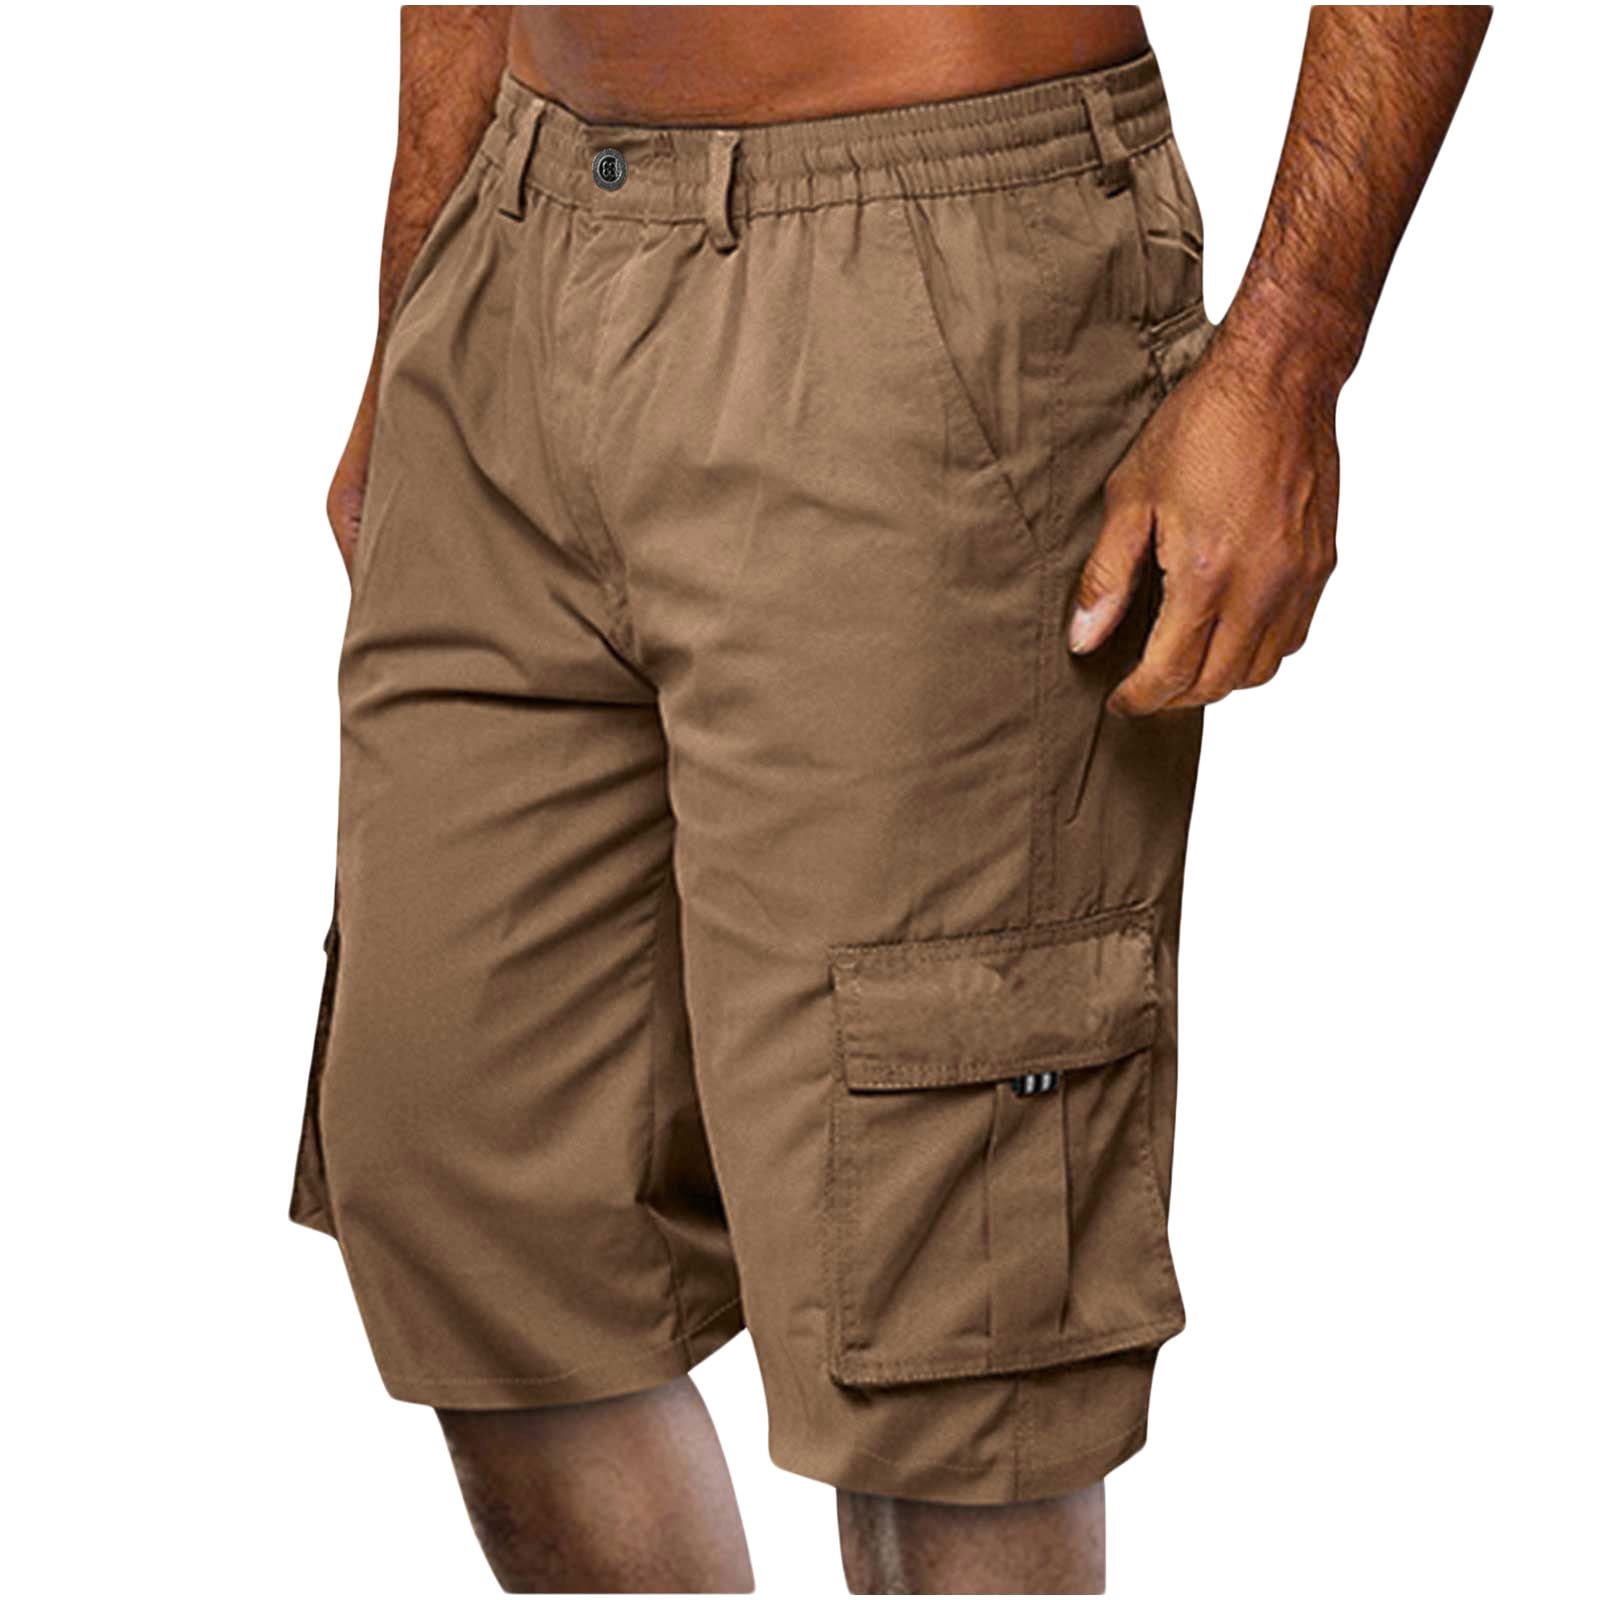 KIHOUT Men's Athletic Slim Fit Shorts Clearance Casual Solid Cargo